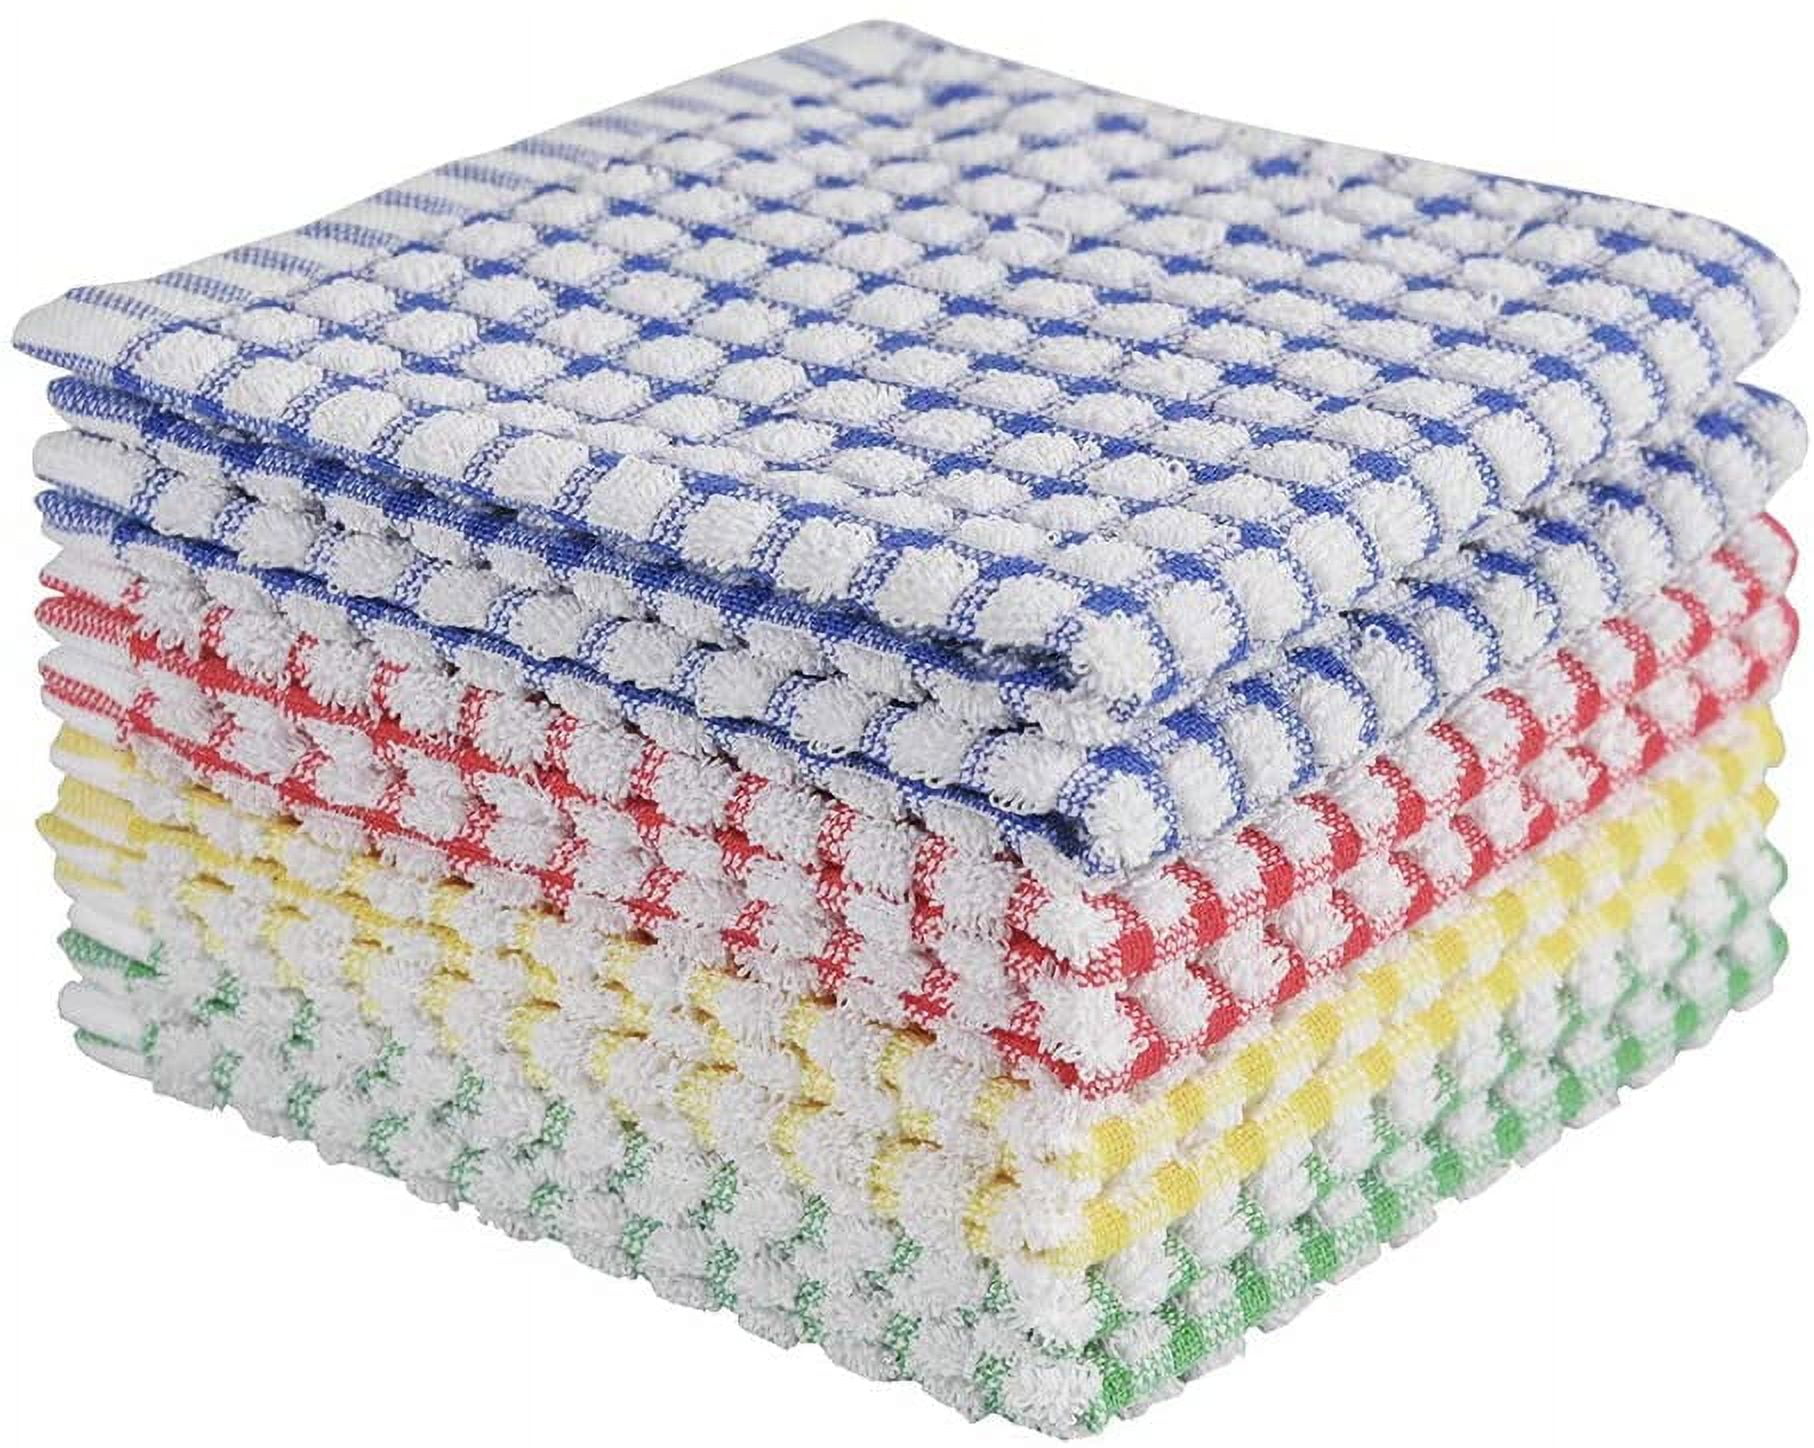 Oeleky Dish Cloths for Kitchen Washing Dishes, Super Absorbent Dish Rags,  Cotton Terry Cleaning Cloths Pack of 8 , 12x12 Inches Mix-2 12x12 Inch  (Pack of 8)